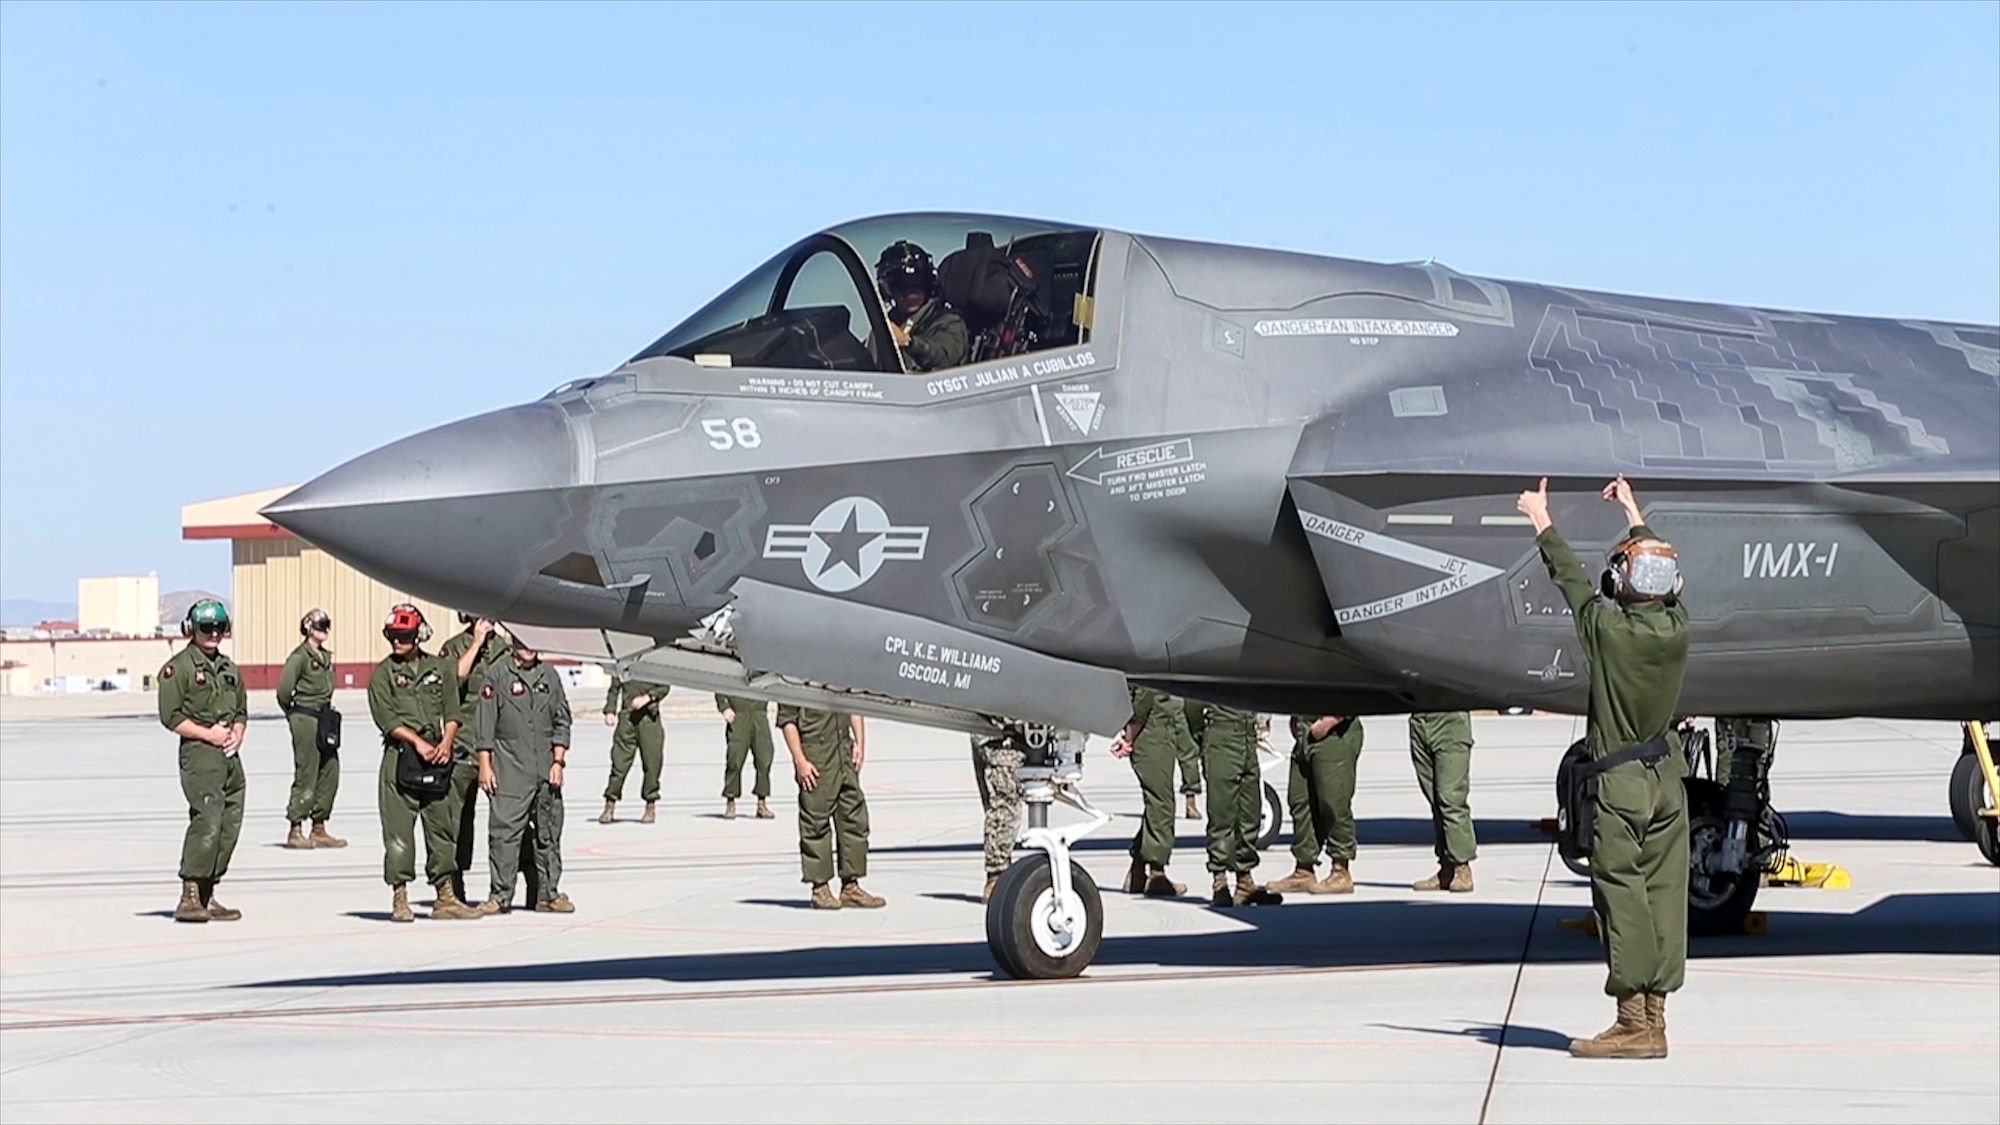 Ground crews prepare an F-35B for flight prior to a test flight at Edwards Air Force Base, California, July 10. (Photo courtesy of Lance Cpl. Larisa Chavez, MCAS Yuma)